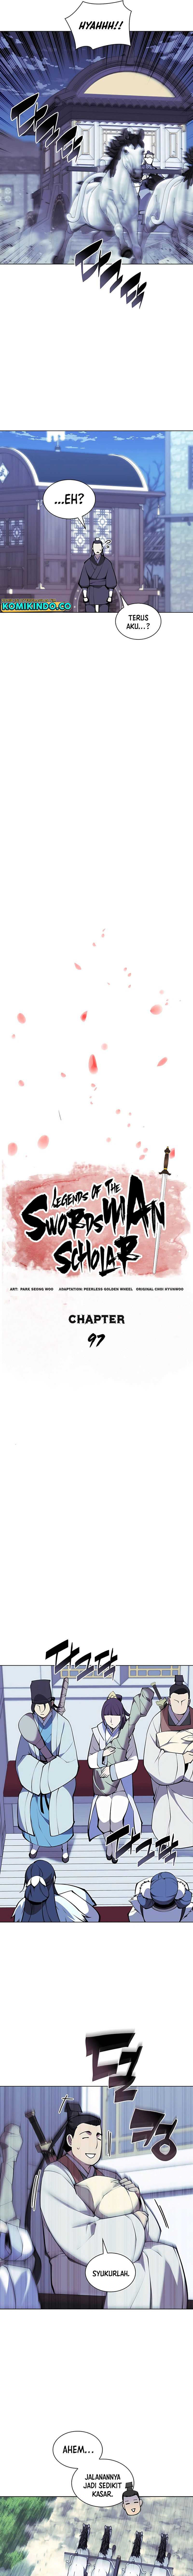 Records of the Swordsman Scholar Chapter 97 Image 5